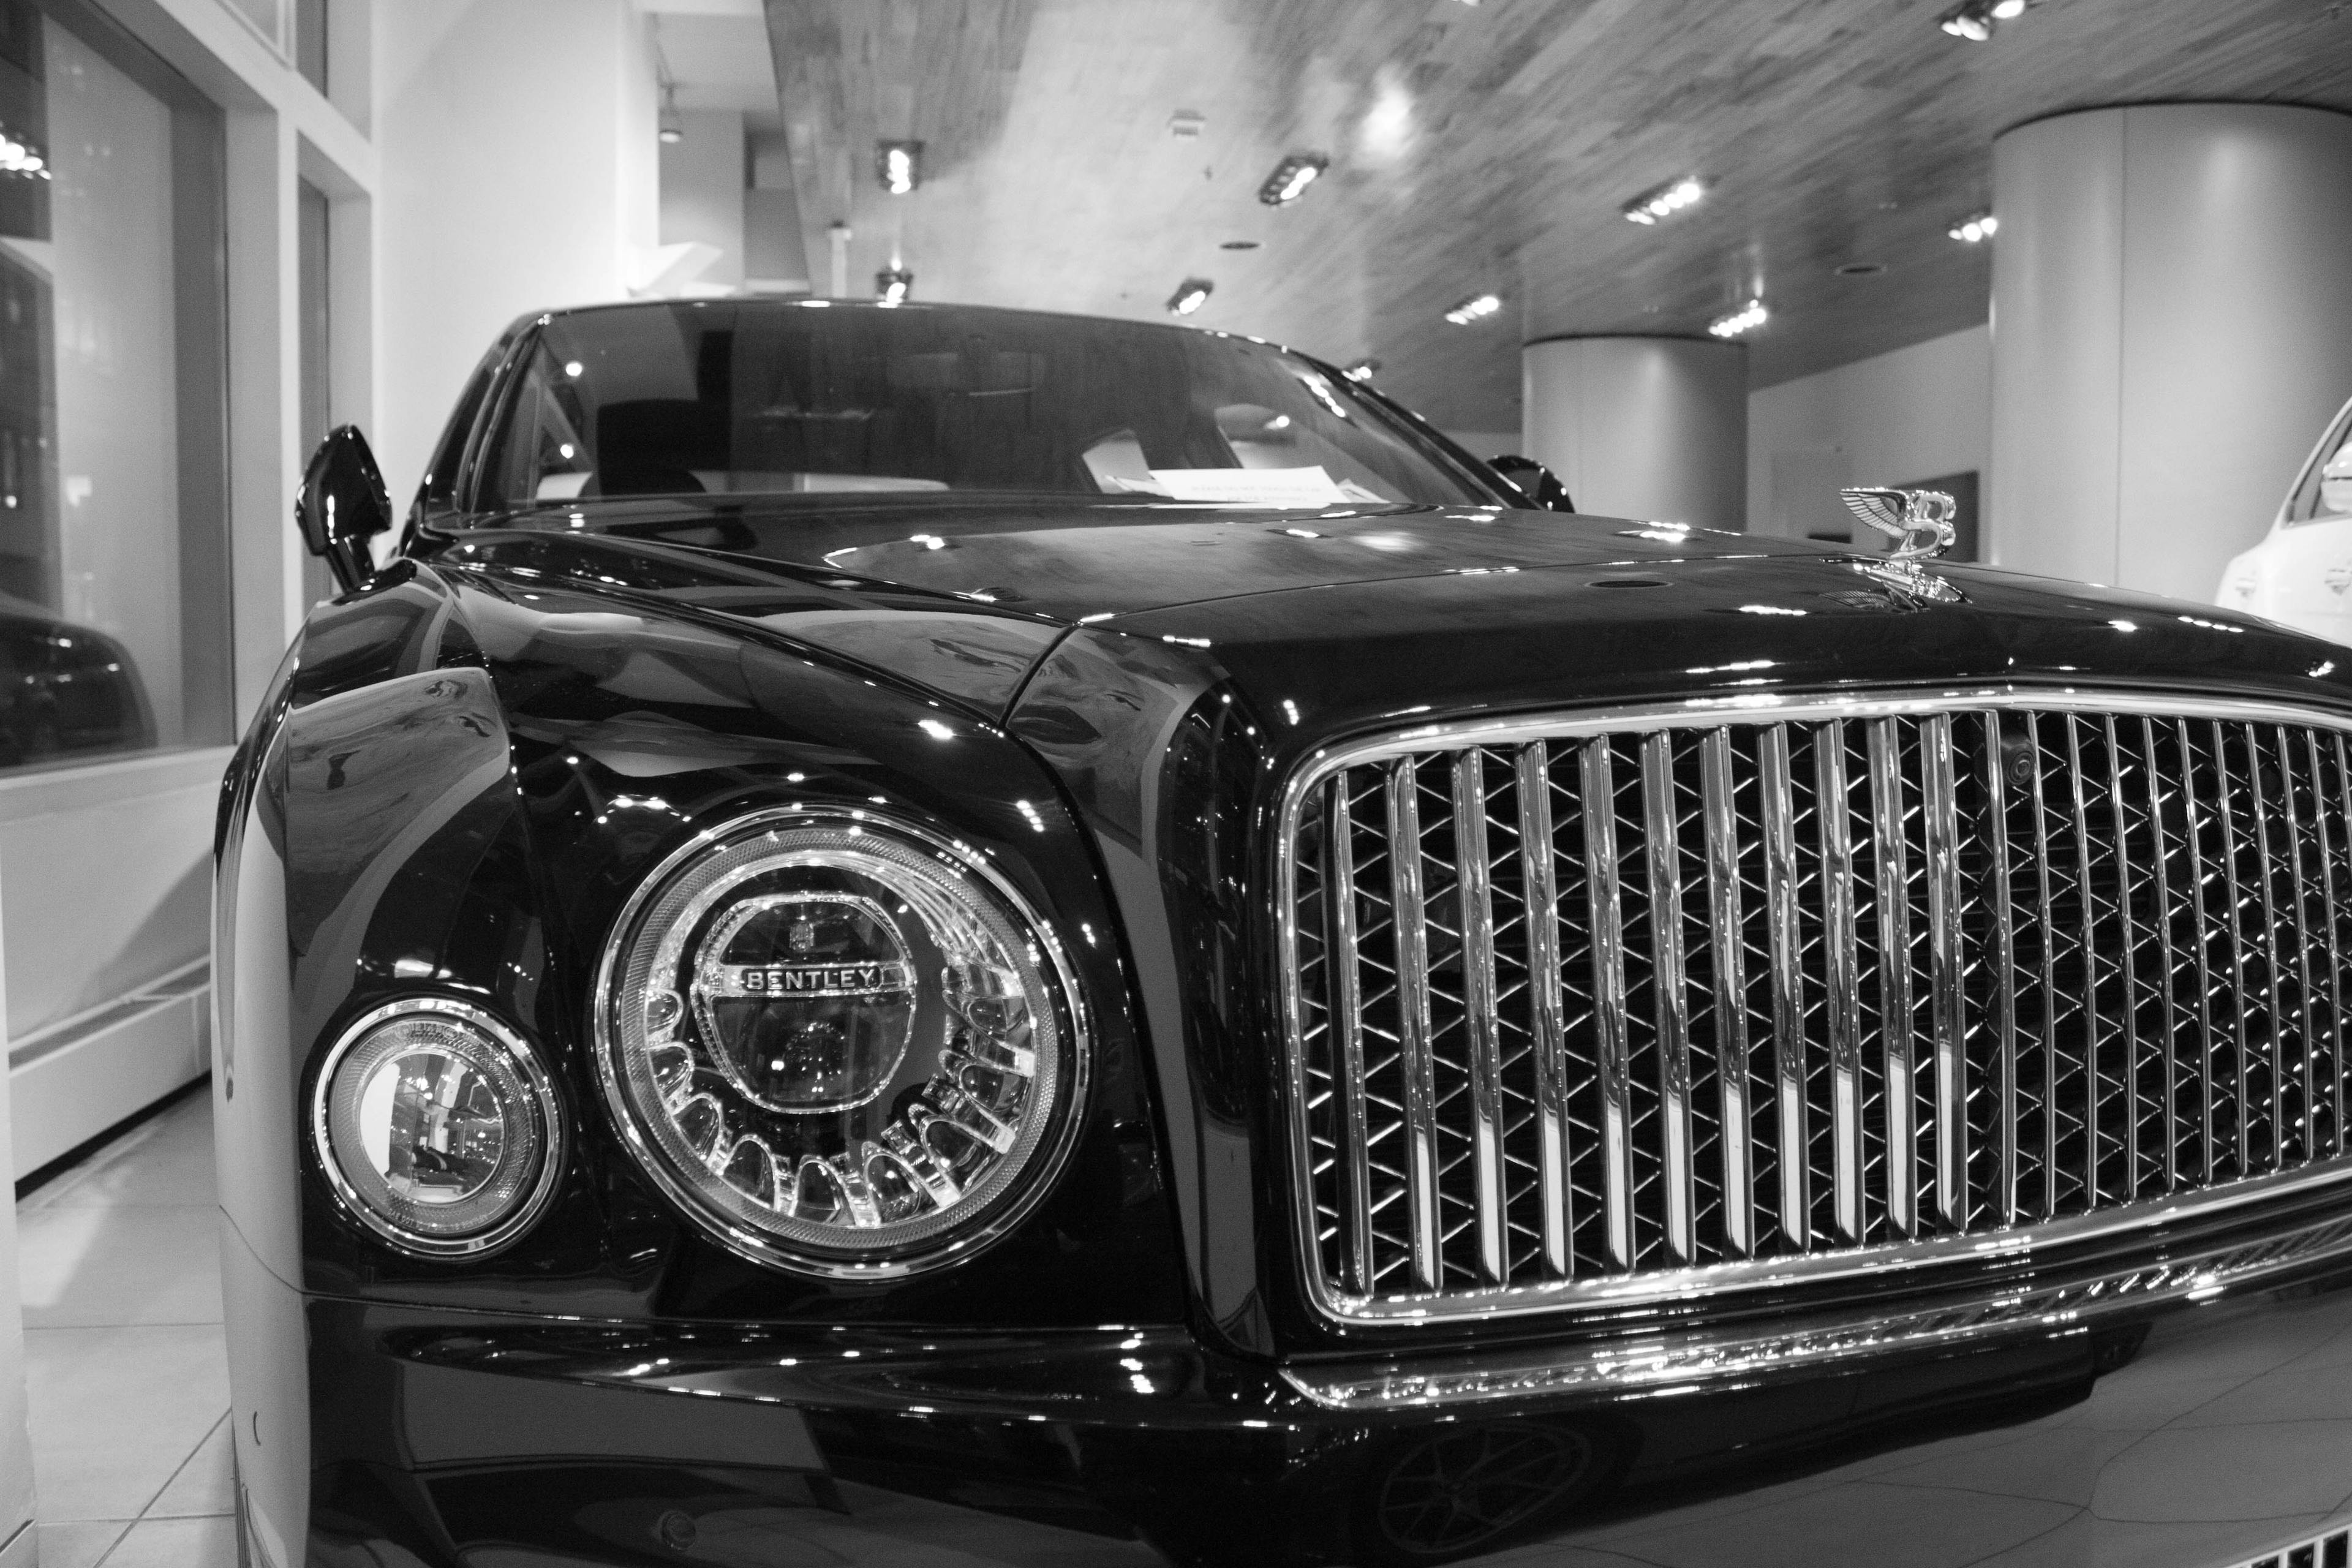 The front fascia of a black Bentley Mulsanne inside a showroom. The entire image is monochromatic and angled from a crouching position near the right headlight.